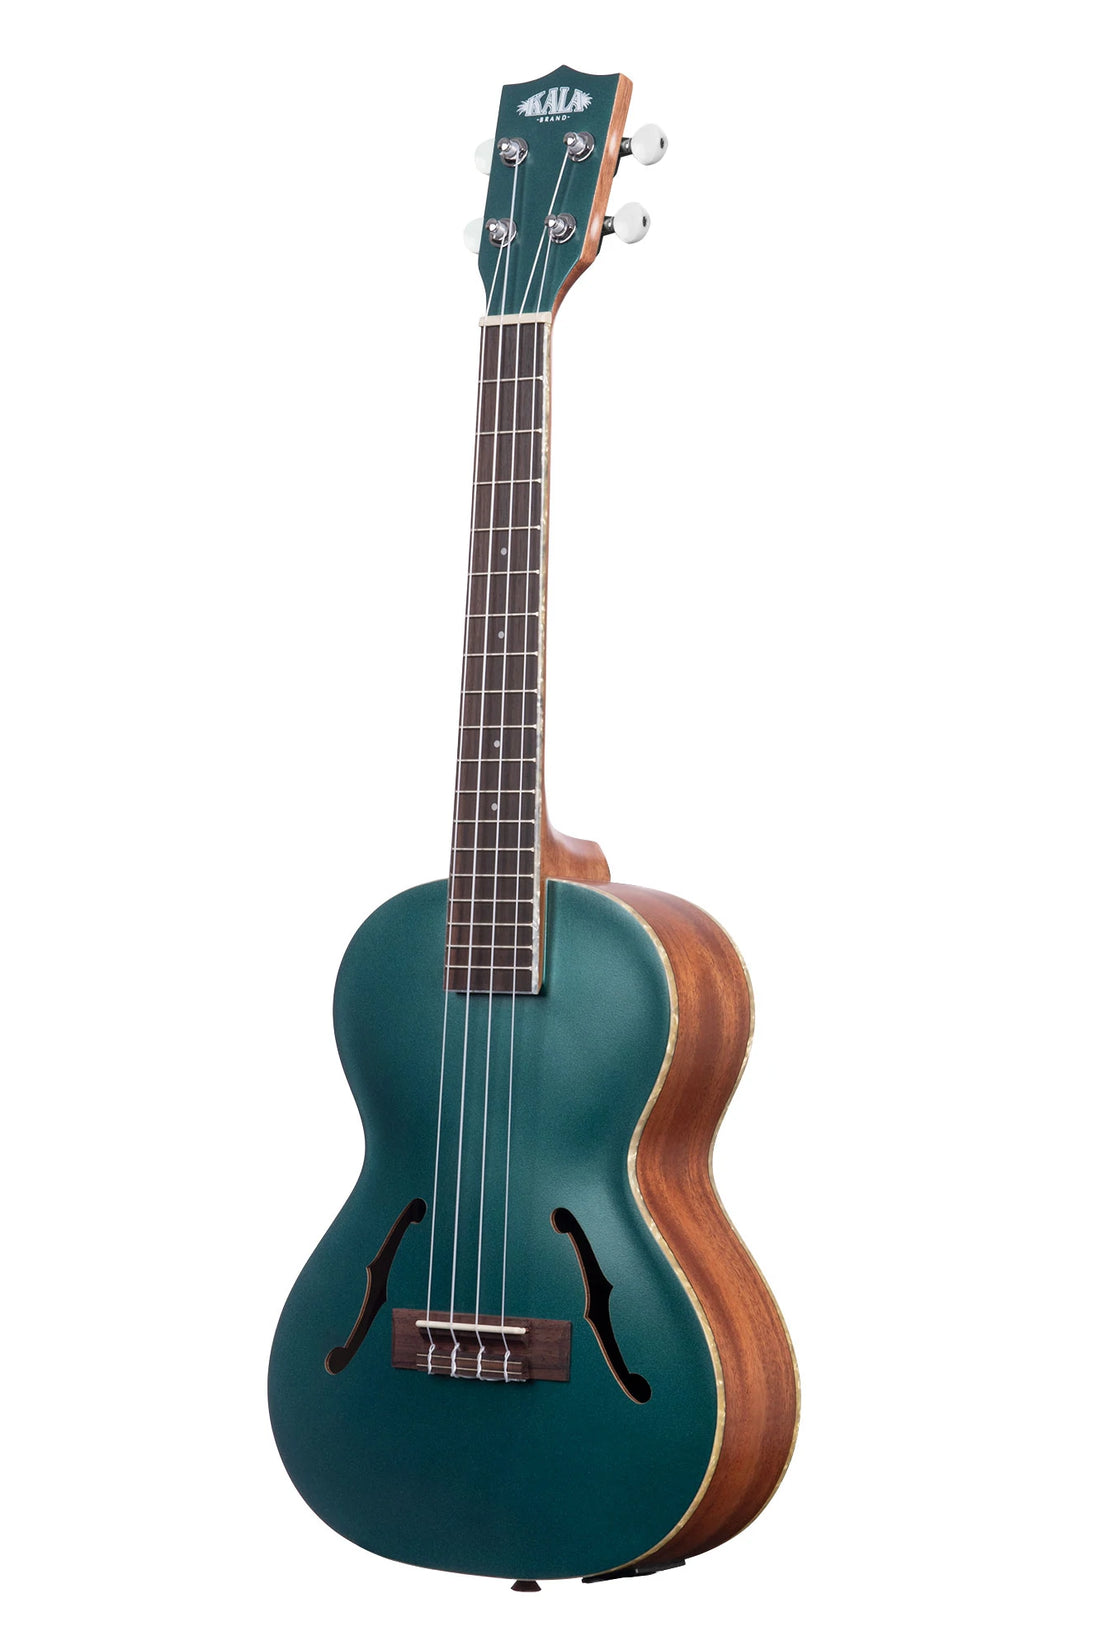 KA-JTE-BKGN Brooklyn Green Jazz Archtop Electric Tenor Bundle $855   Ukulele + Deluxe Hardcase + Private Online Lesson + Free Australia Post Shipping In Australia.  Ukulele Trading Co Australia